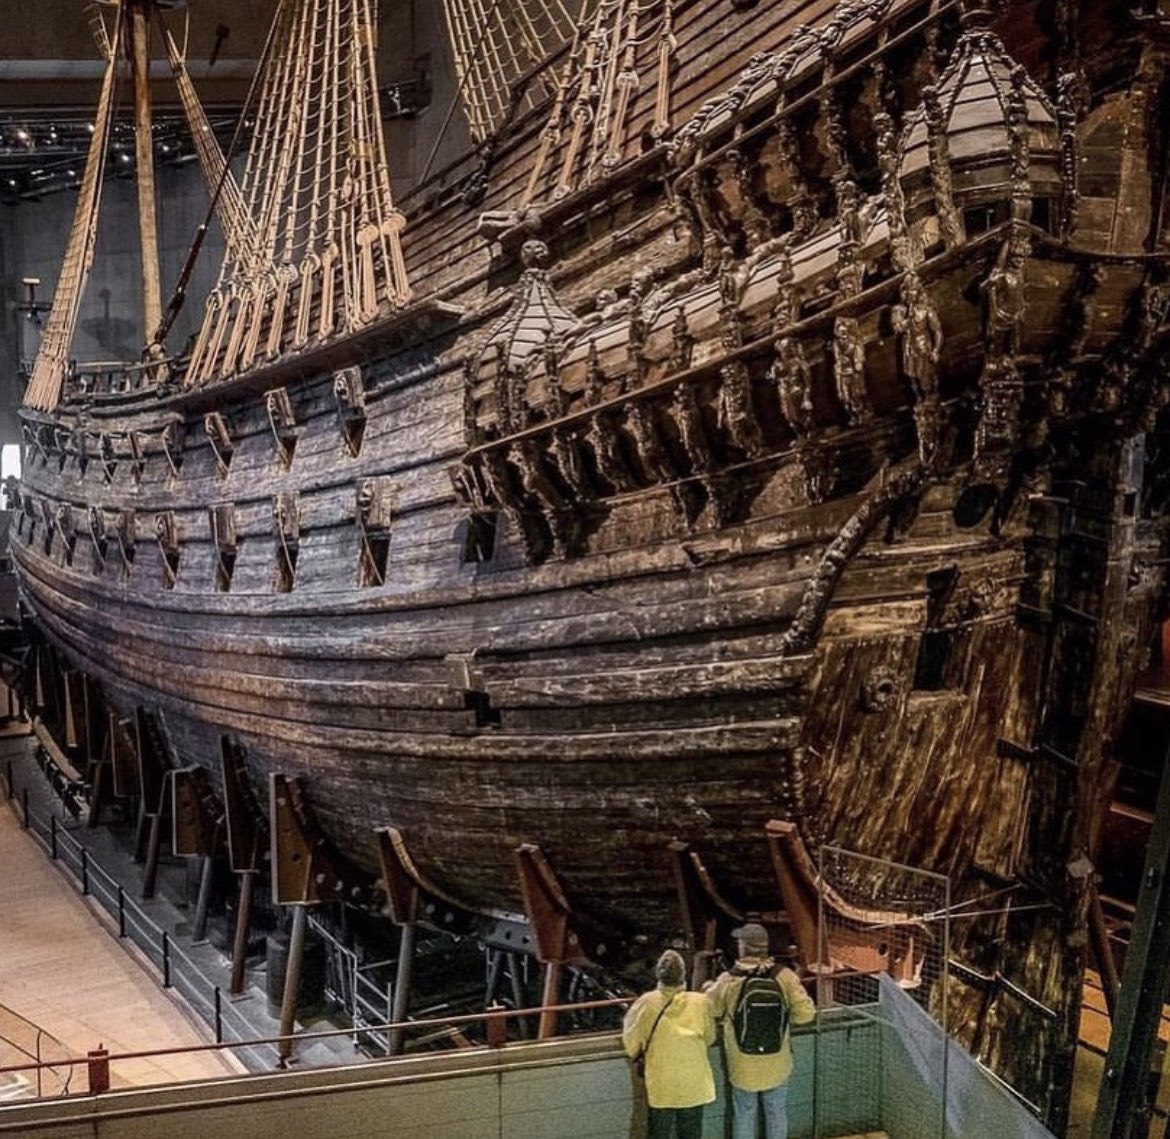 The Swedish warship Vasa. It sank in 1628 less than a mile into its maiden voyage and was recovered from the sea floor after 333 years almost completely intact. It is now housed at the Vasa Museum in Stockholm, it is the world's best preserved 17th century ship.